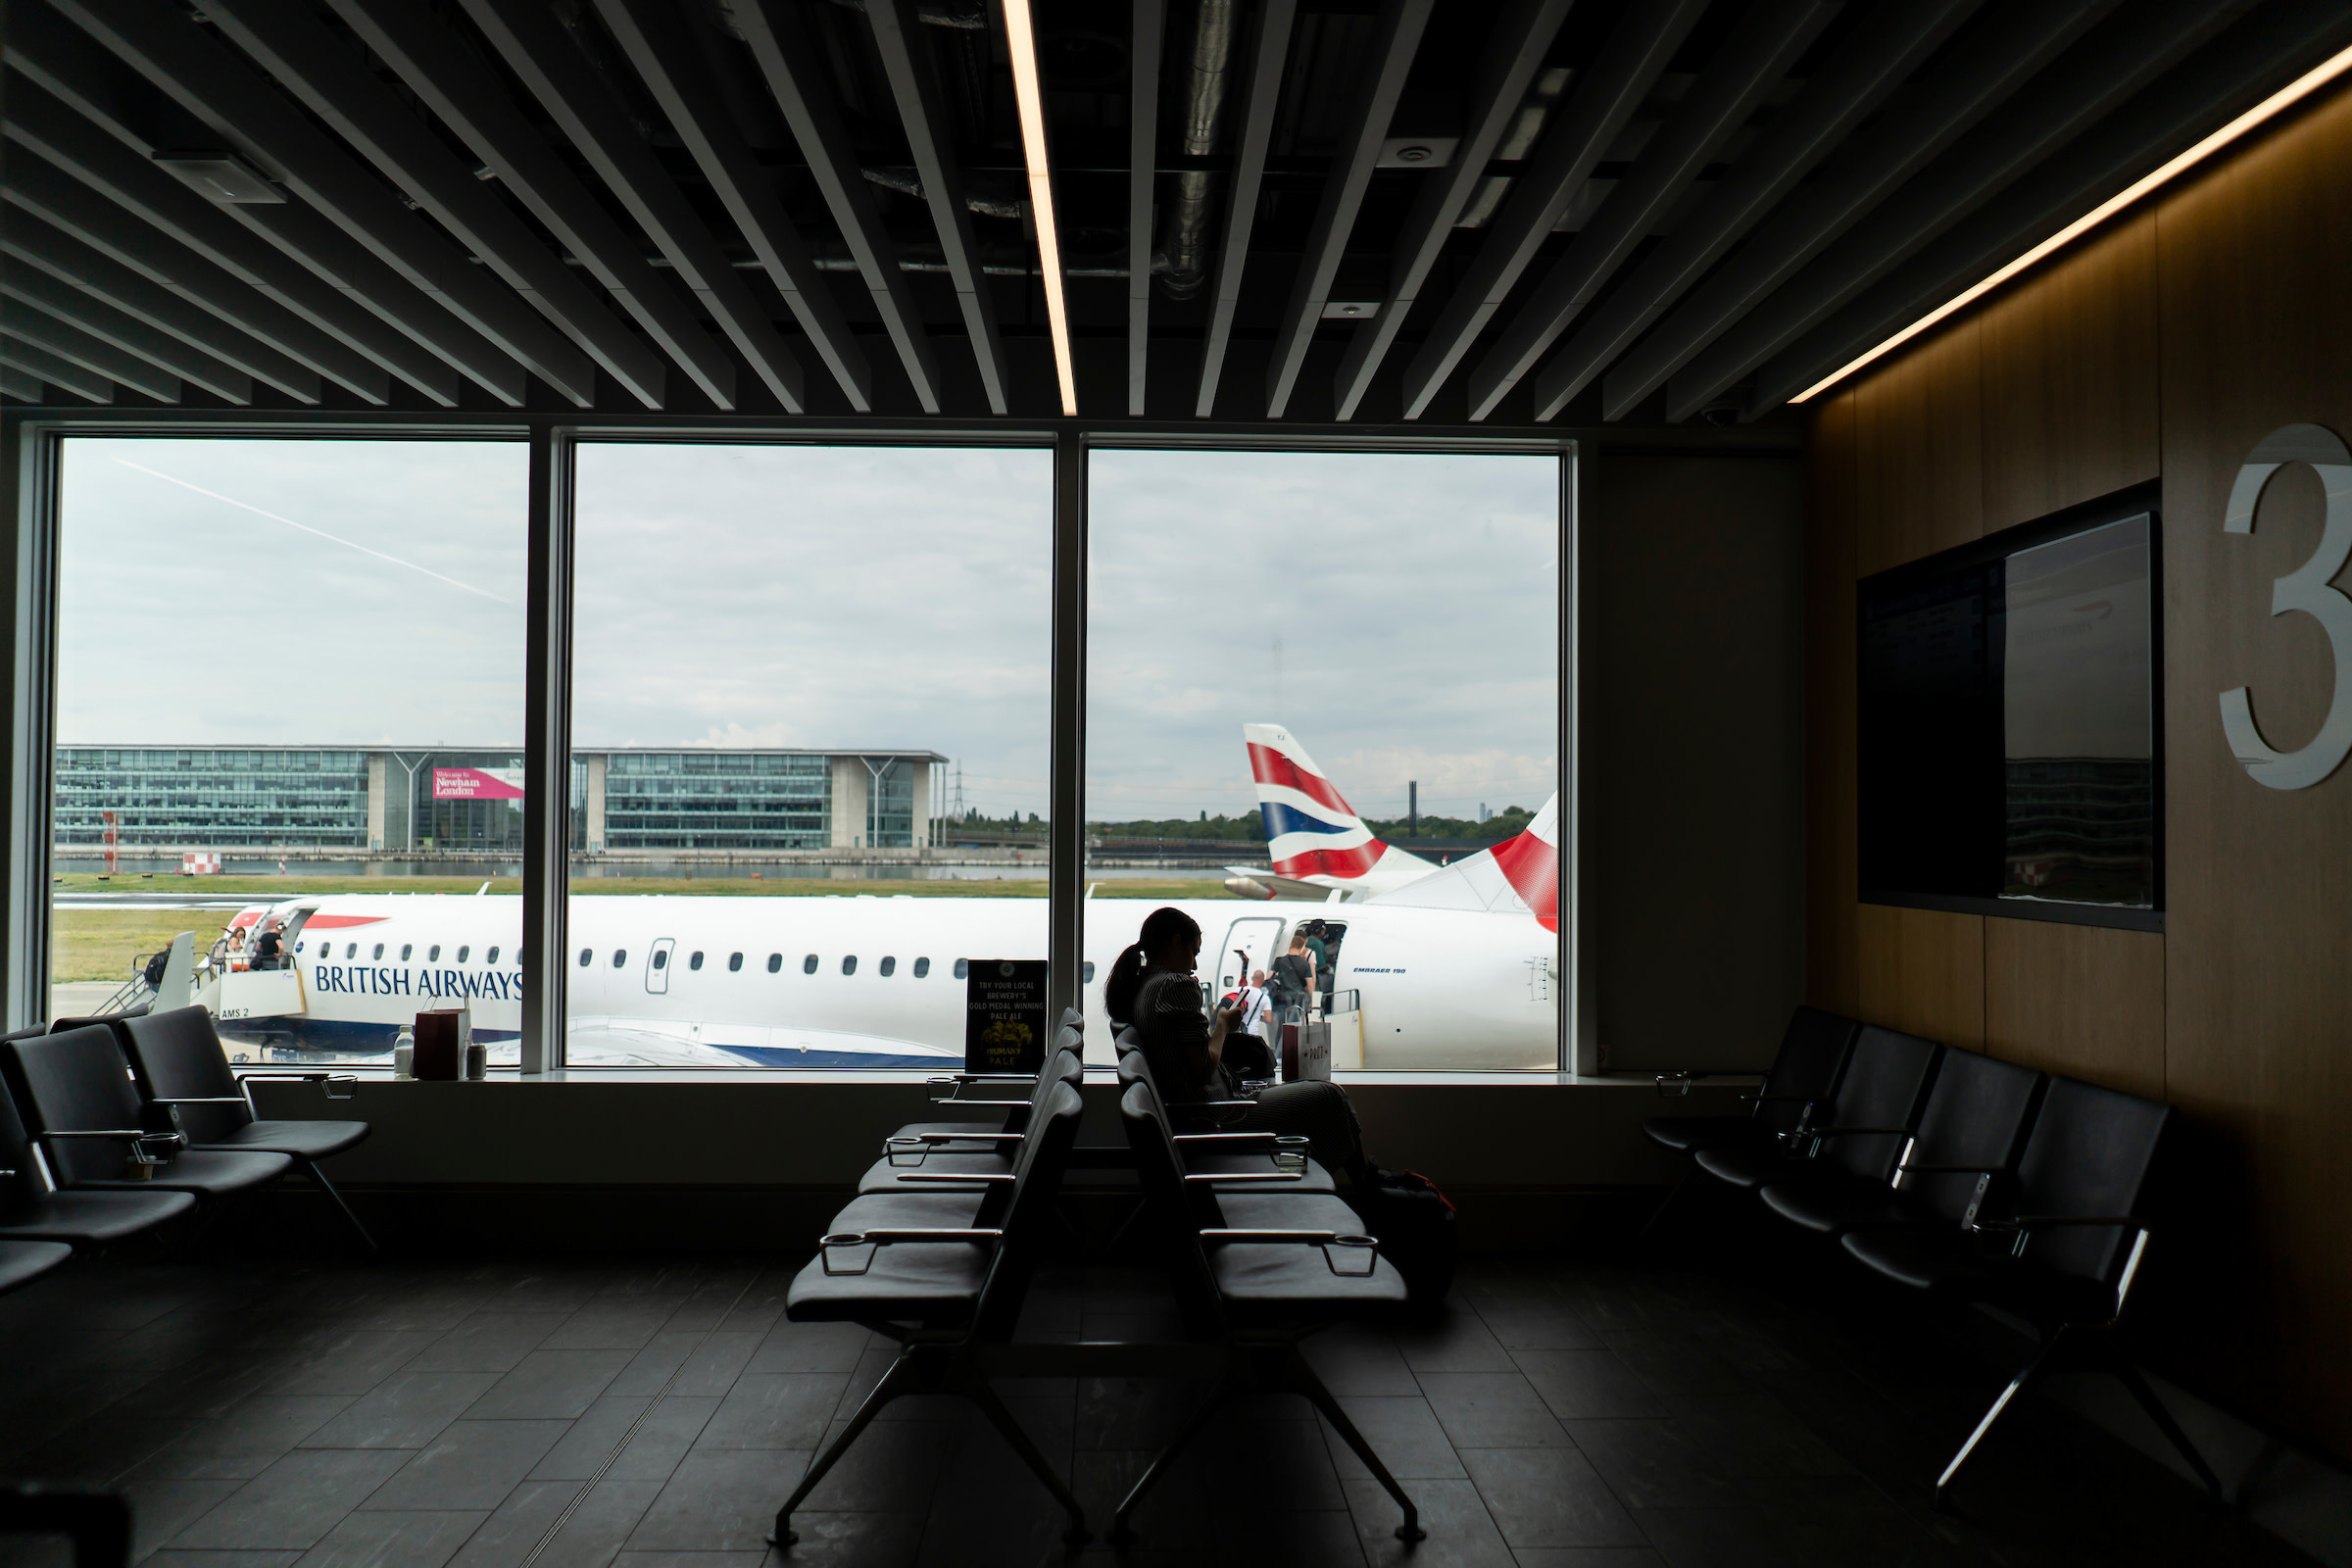 Lady in waiting area of LCY airport with British Airways plane in the background